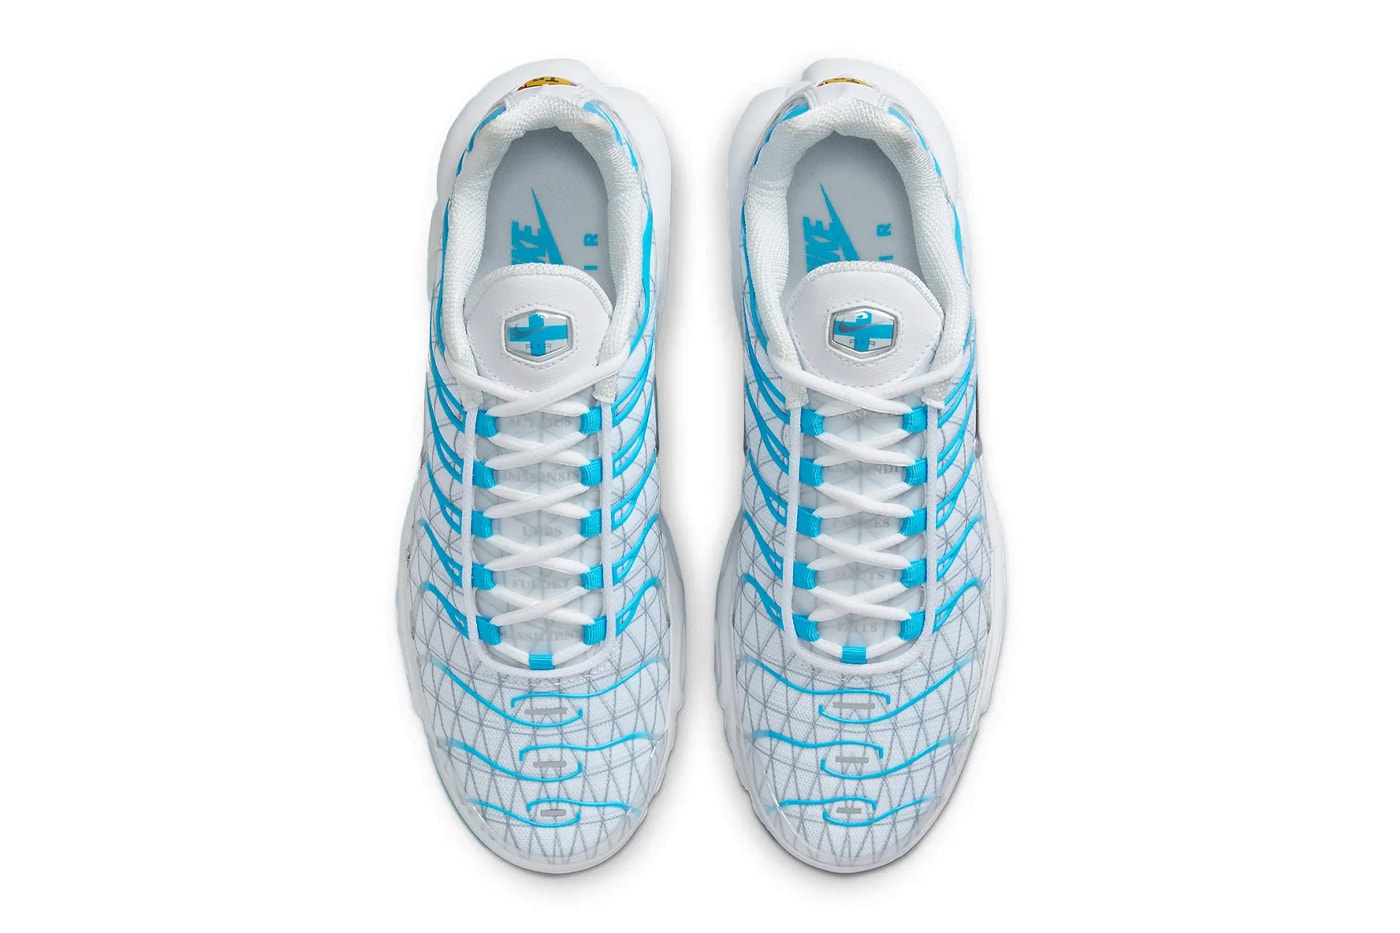 Nike Air Max Plus Surfaces in "Marseille" technical shoe FQ2397-100 swoosh hiking everyday shoes